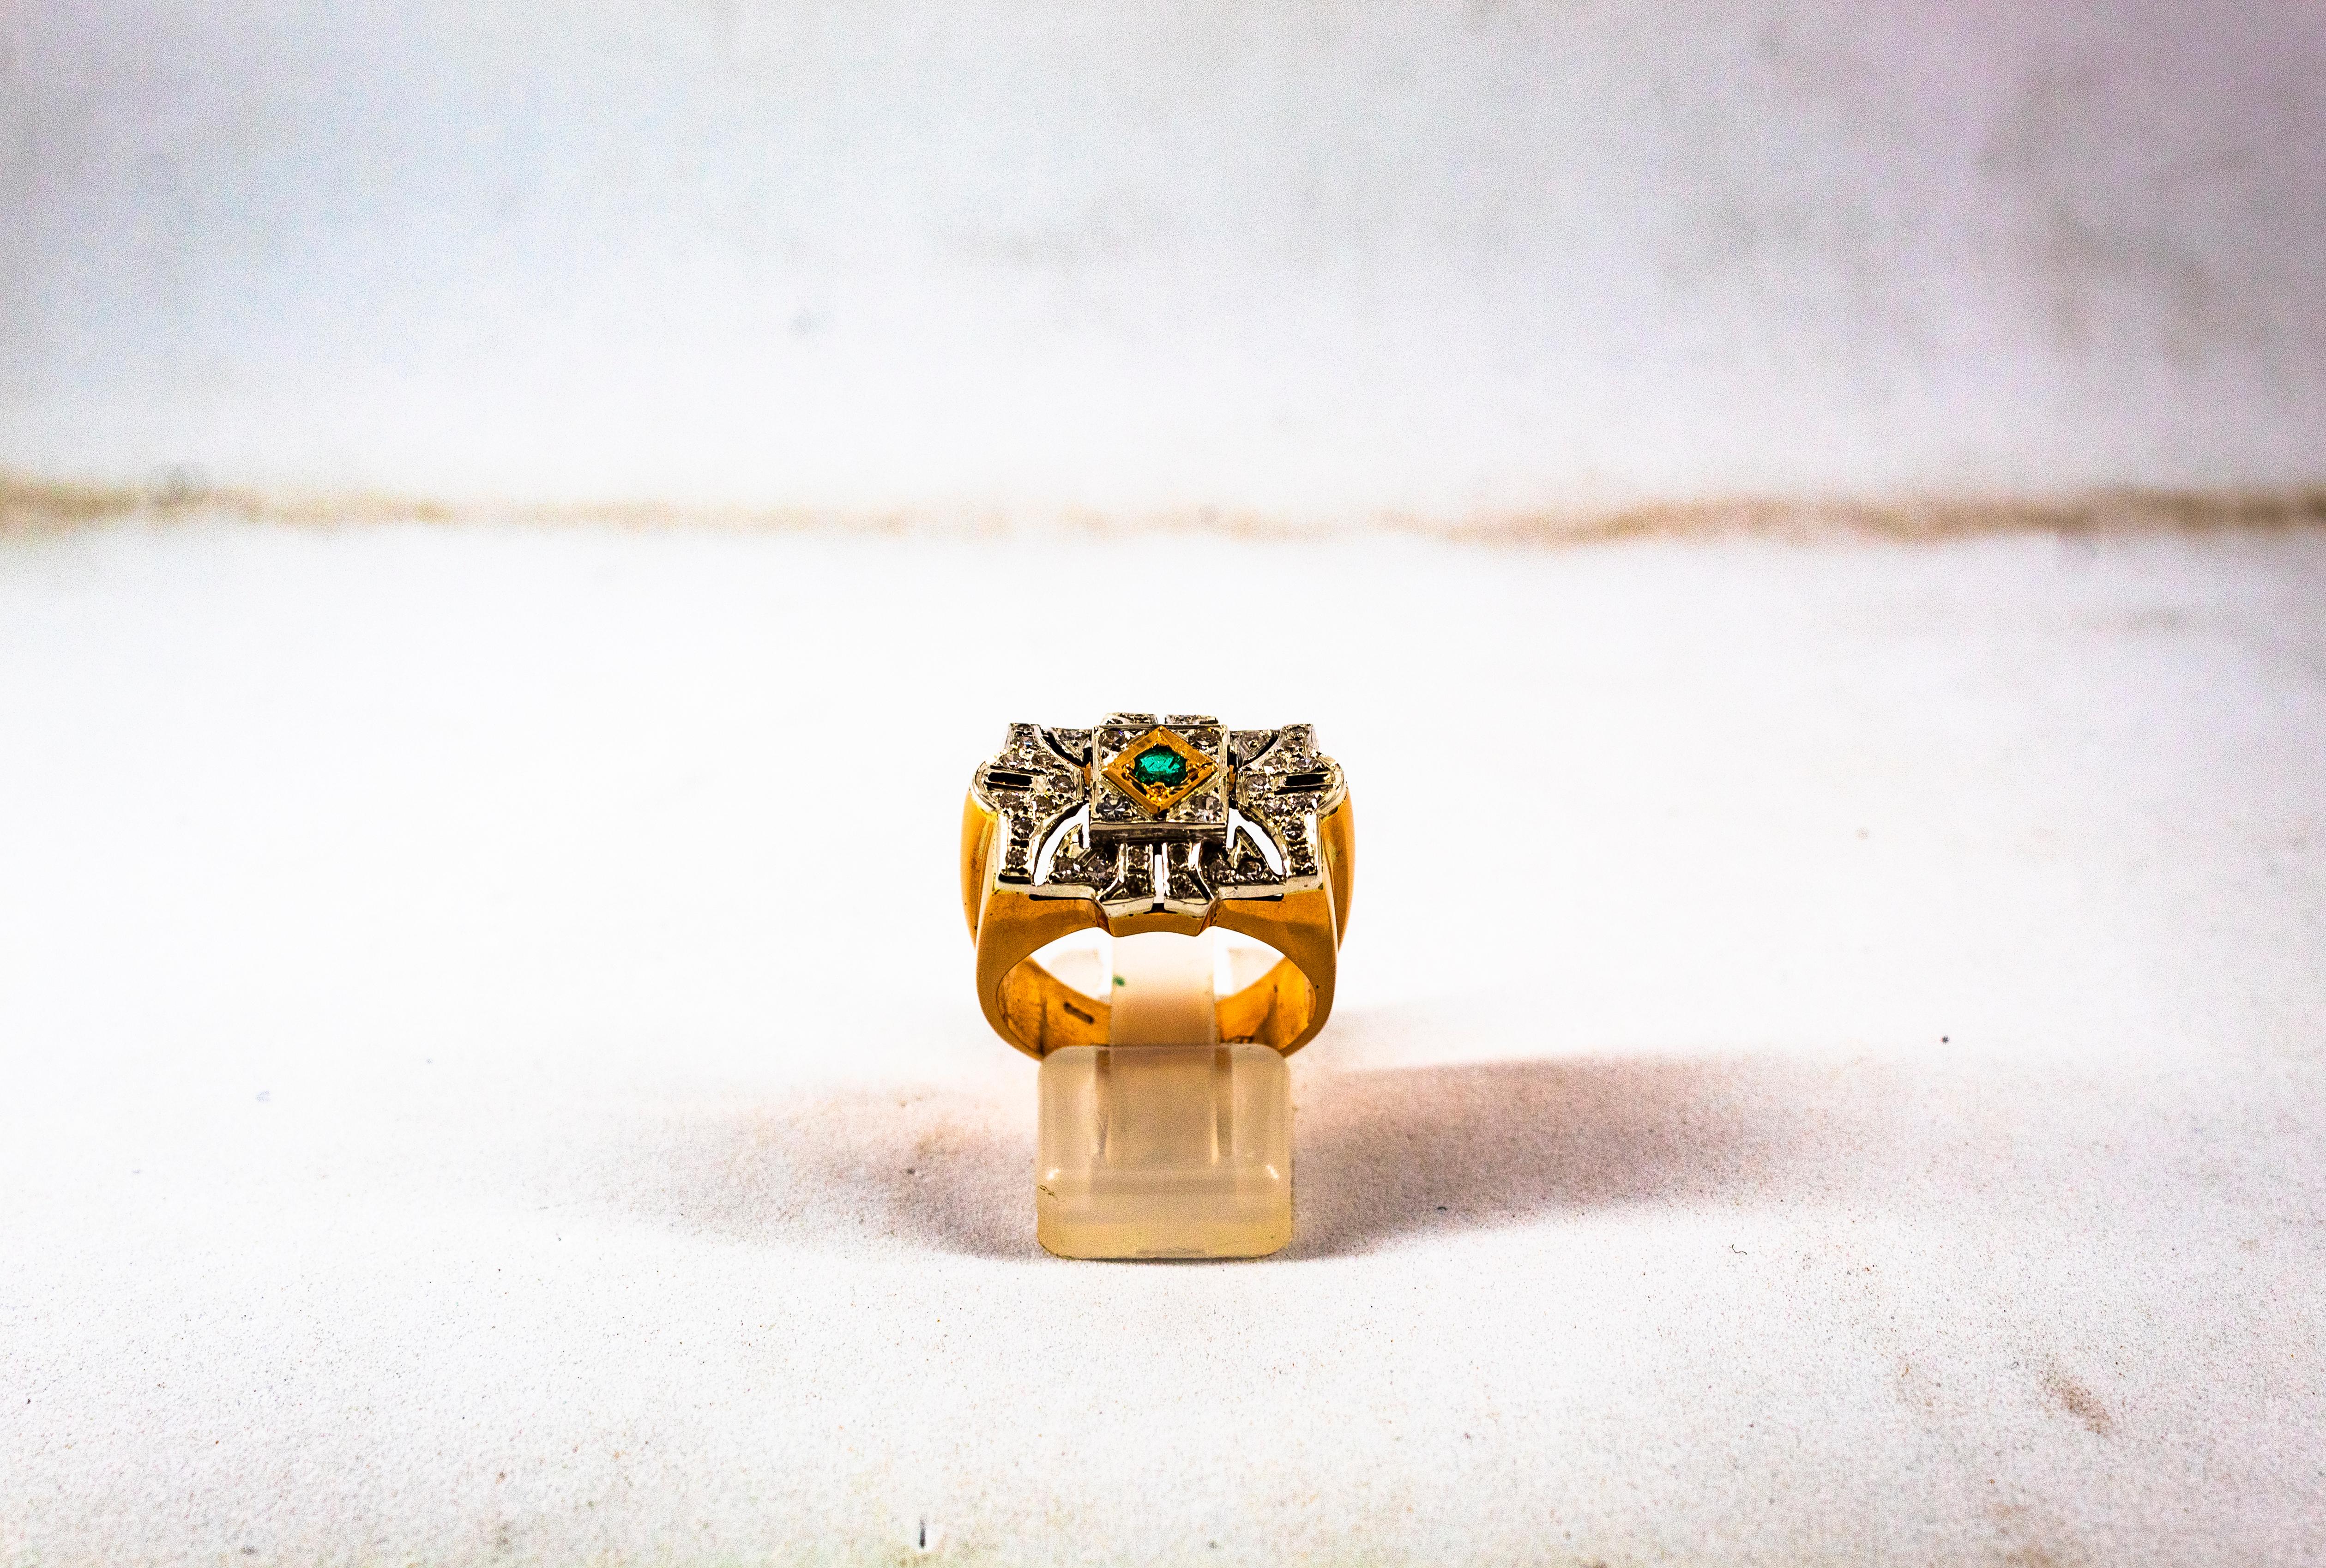 This Ring is made of 9K Yellow Gold and Sterling Silver.
This Ring has 0.65 Carats of White Brilliant Cut Diamonds.
This Ring has a 0.10 Carats Emerald.

This Ring is available also with a central Ruby or a central Blue Sapphire.

Size ITA: 15 USA: